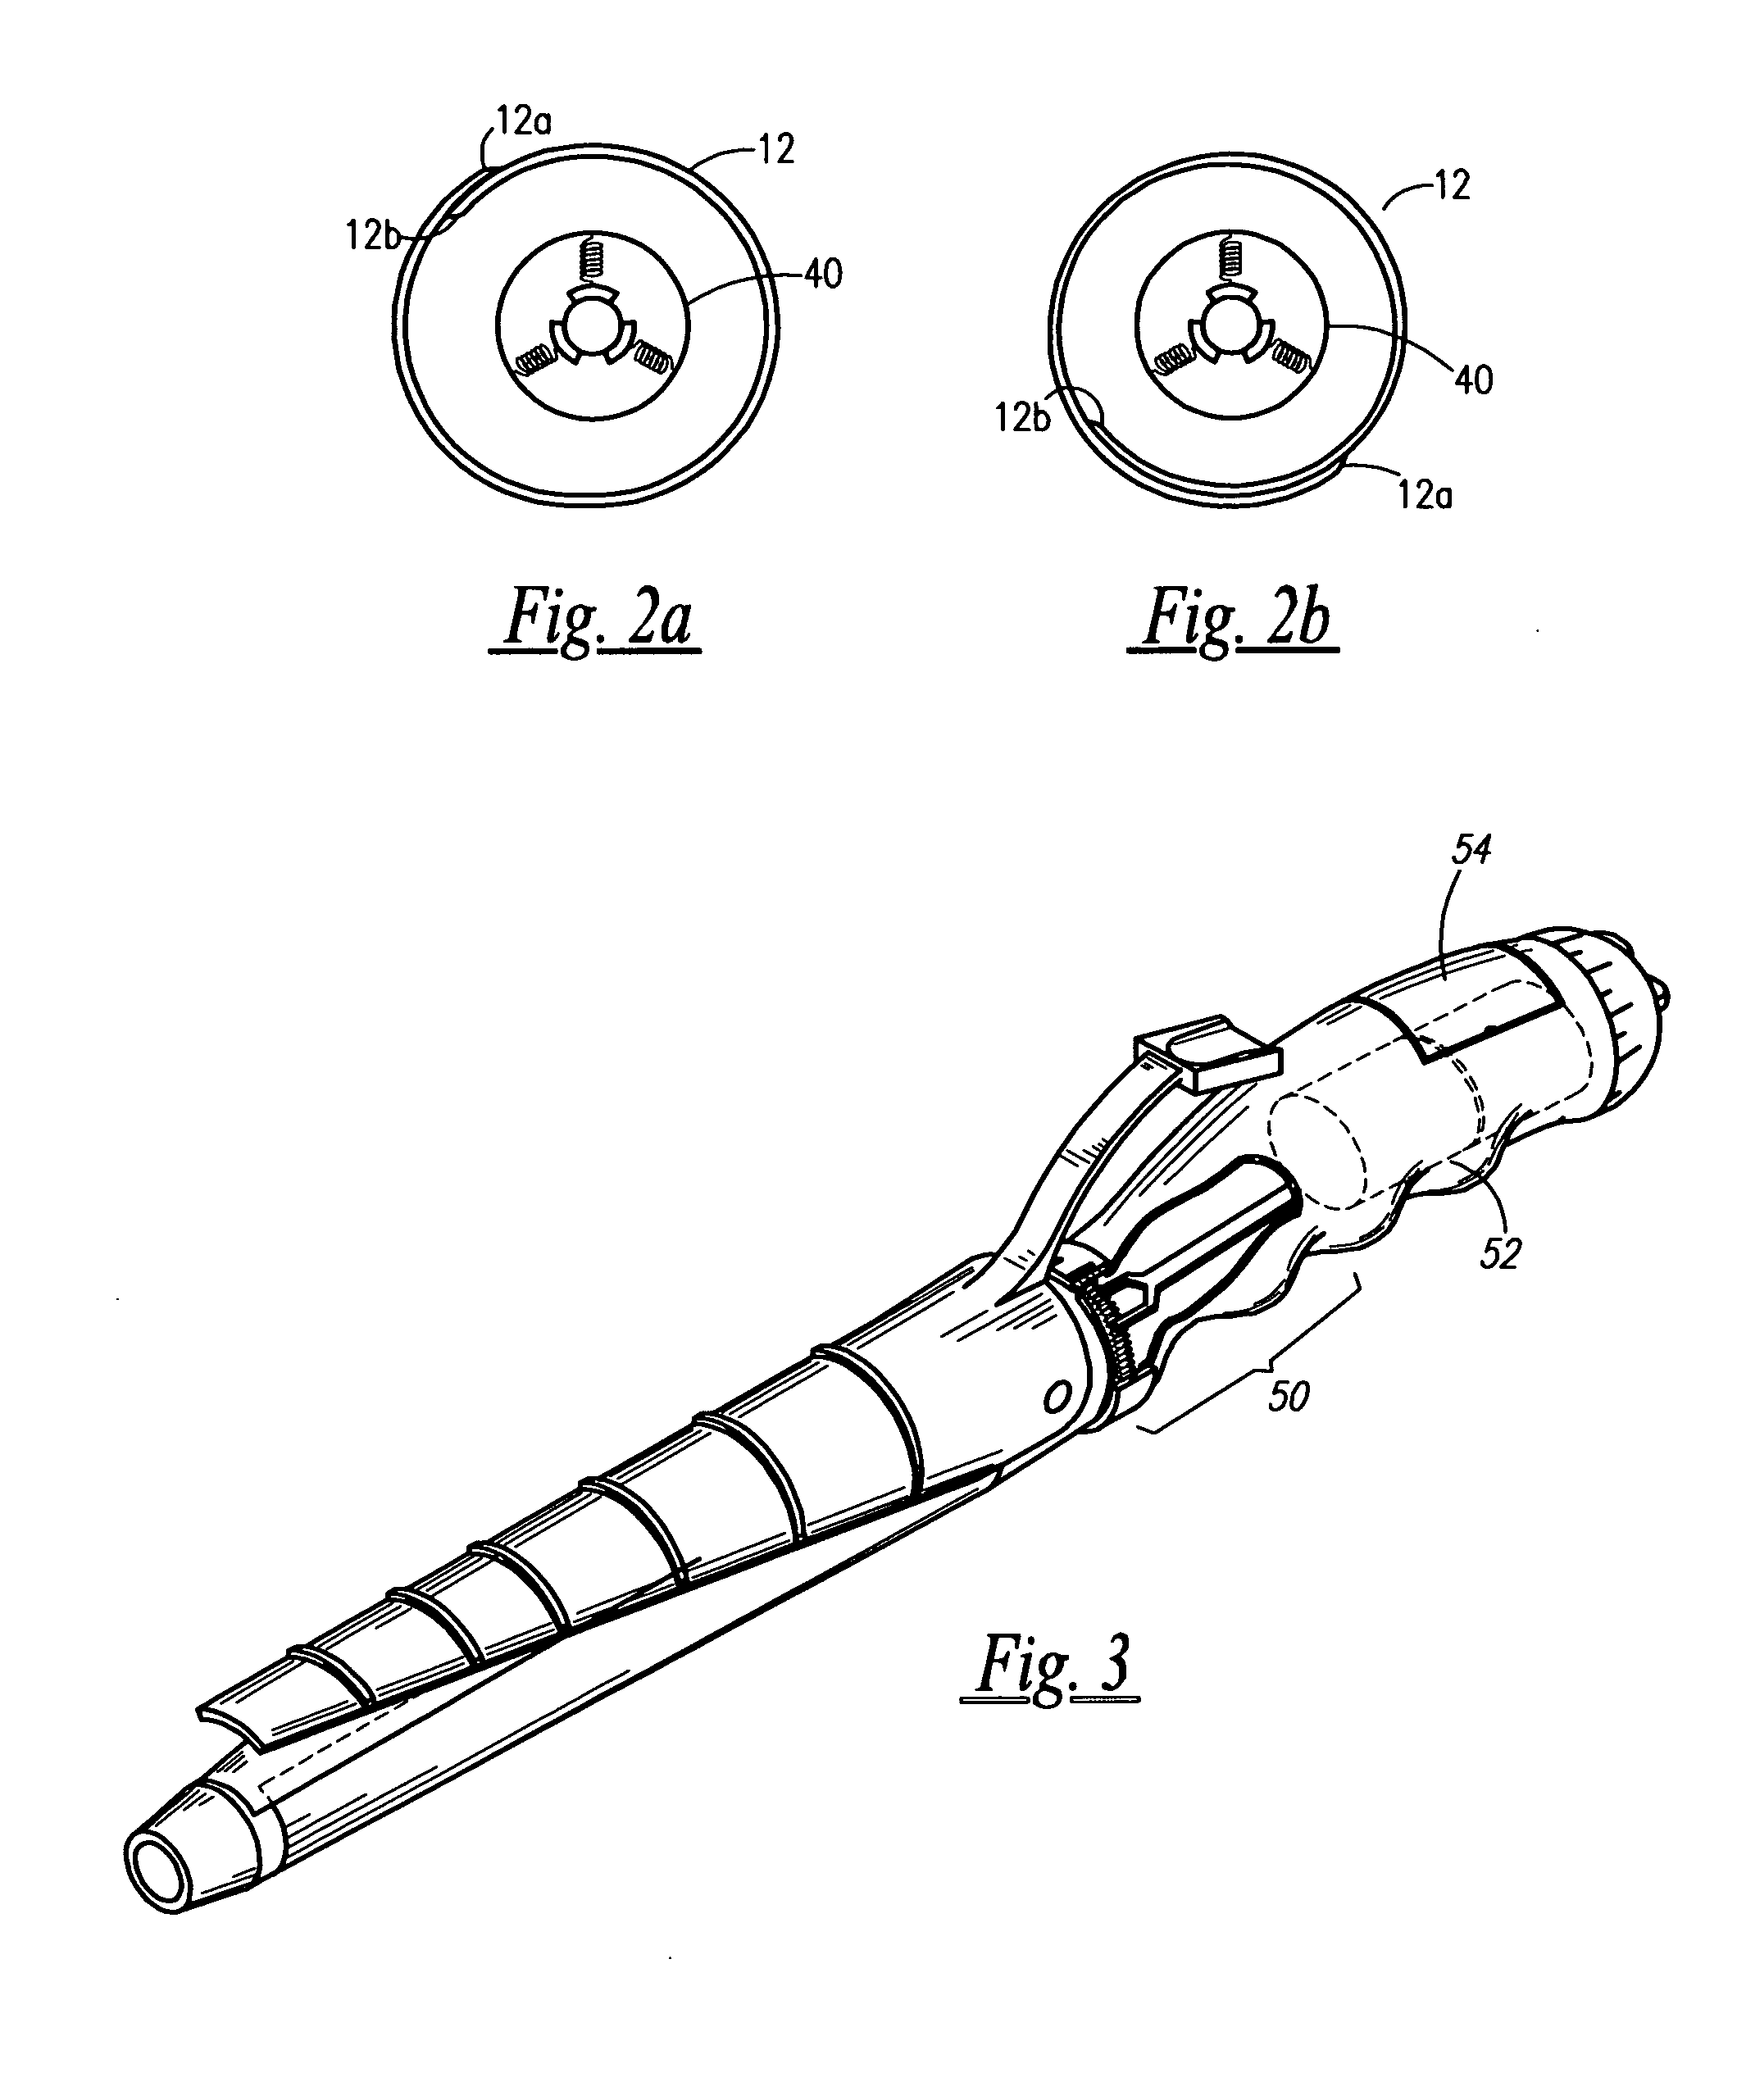 Apparatus and method for cordless electric curling iron with adjustable diameter barrel